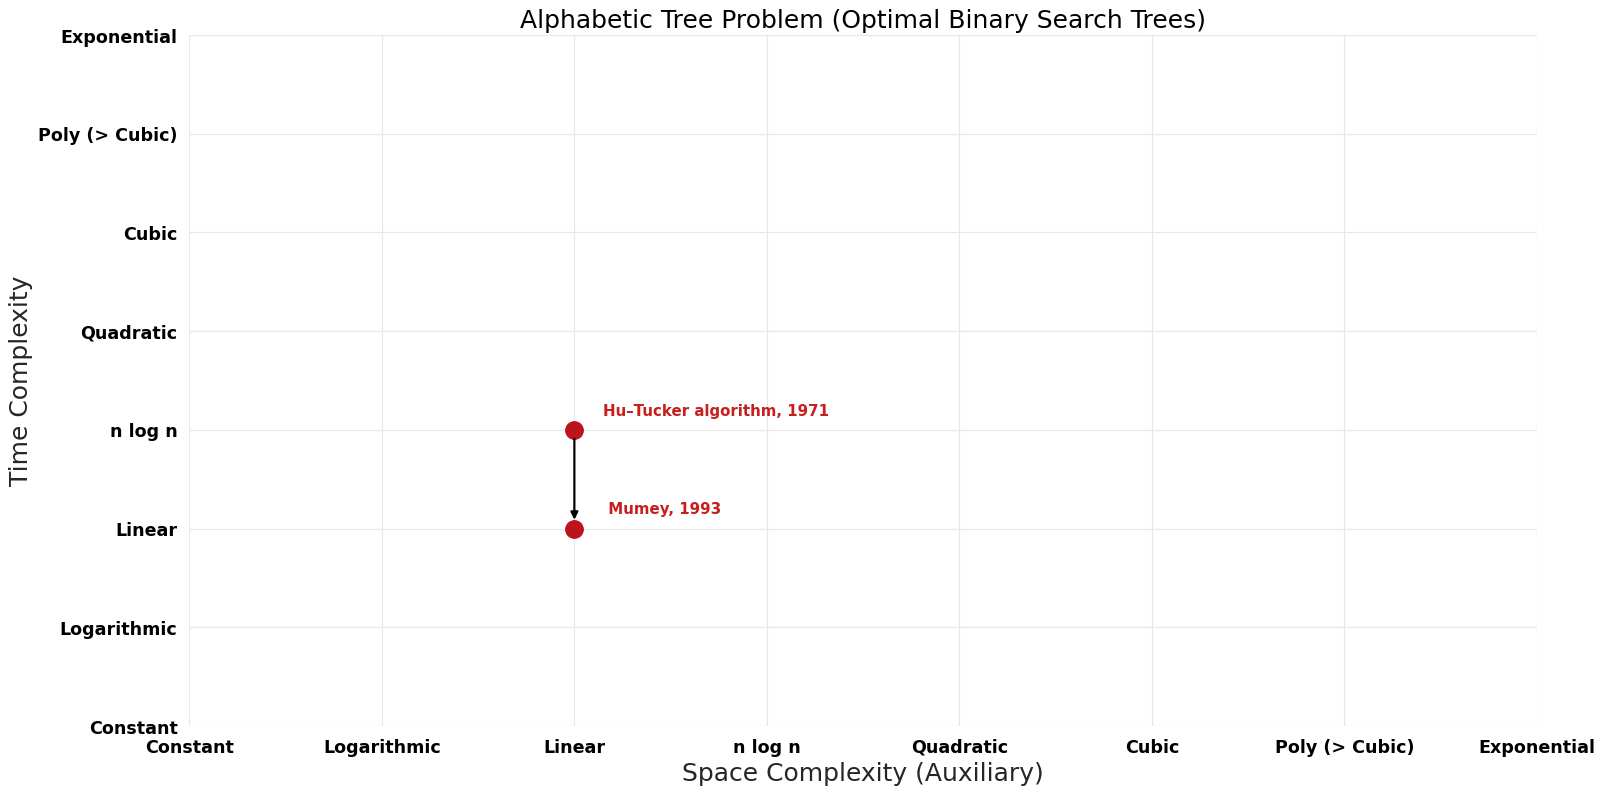 Optimal Binary Search Trees - Alphabetic Tree Problem - Pareto Frontier.png